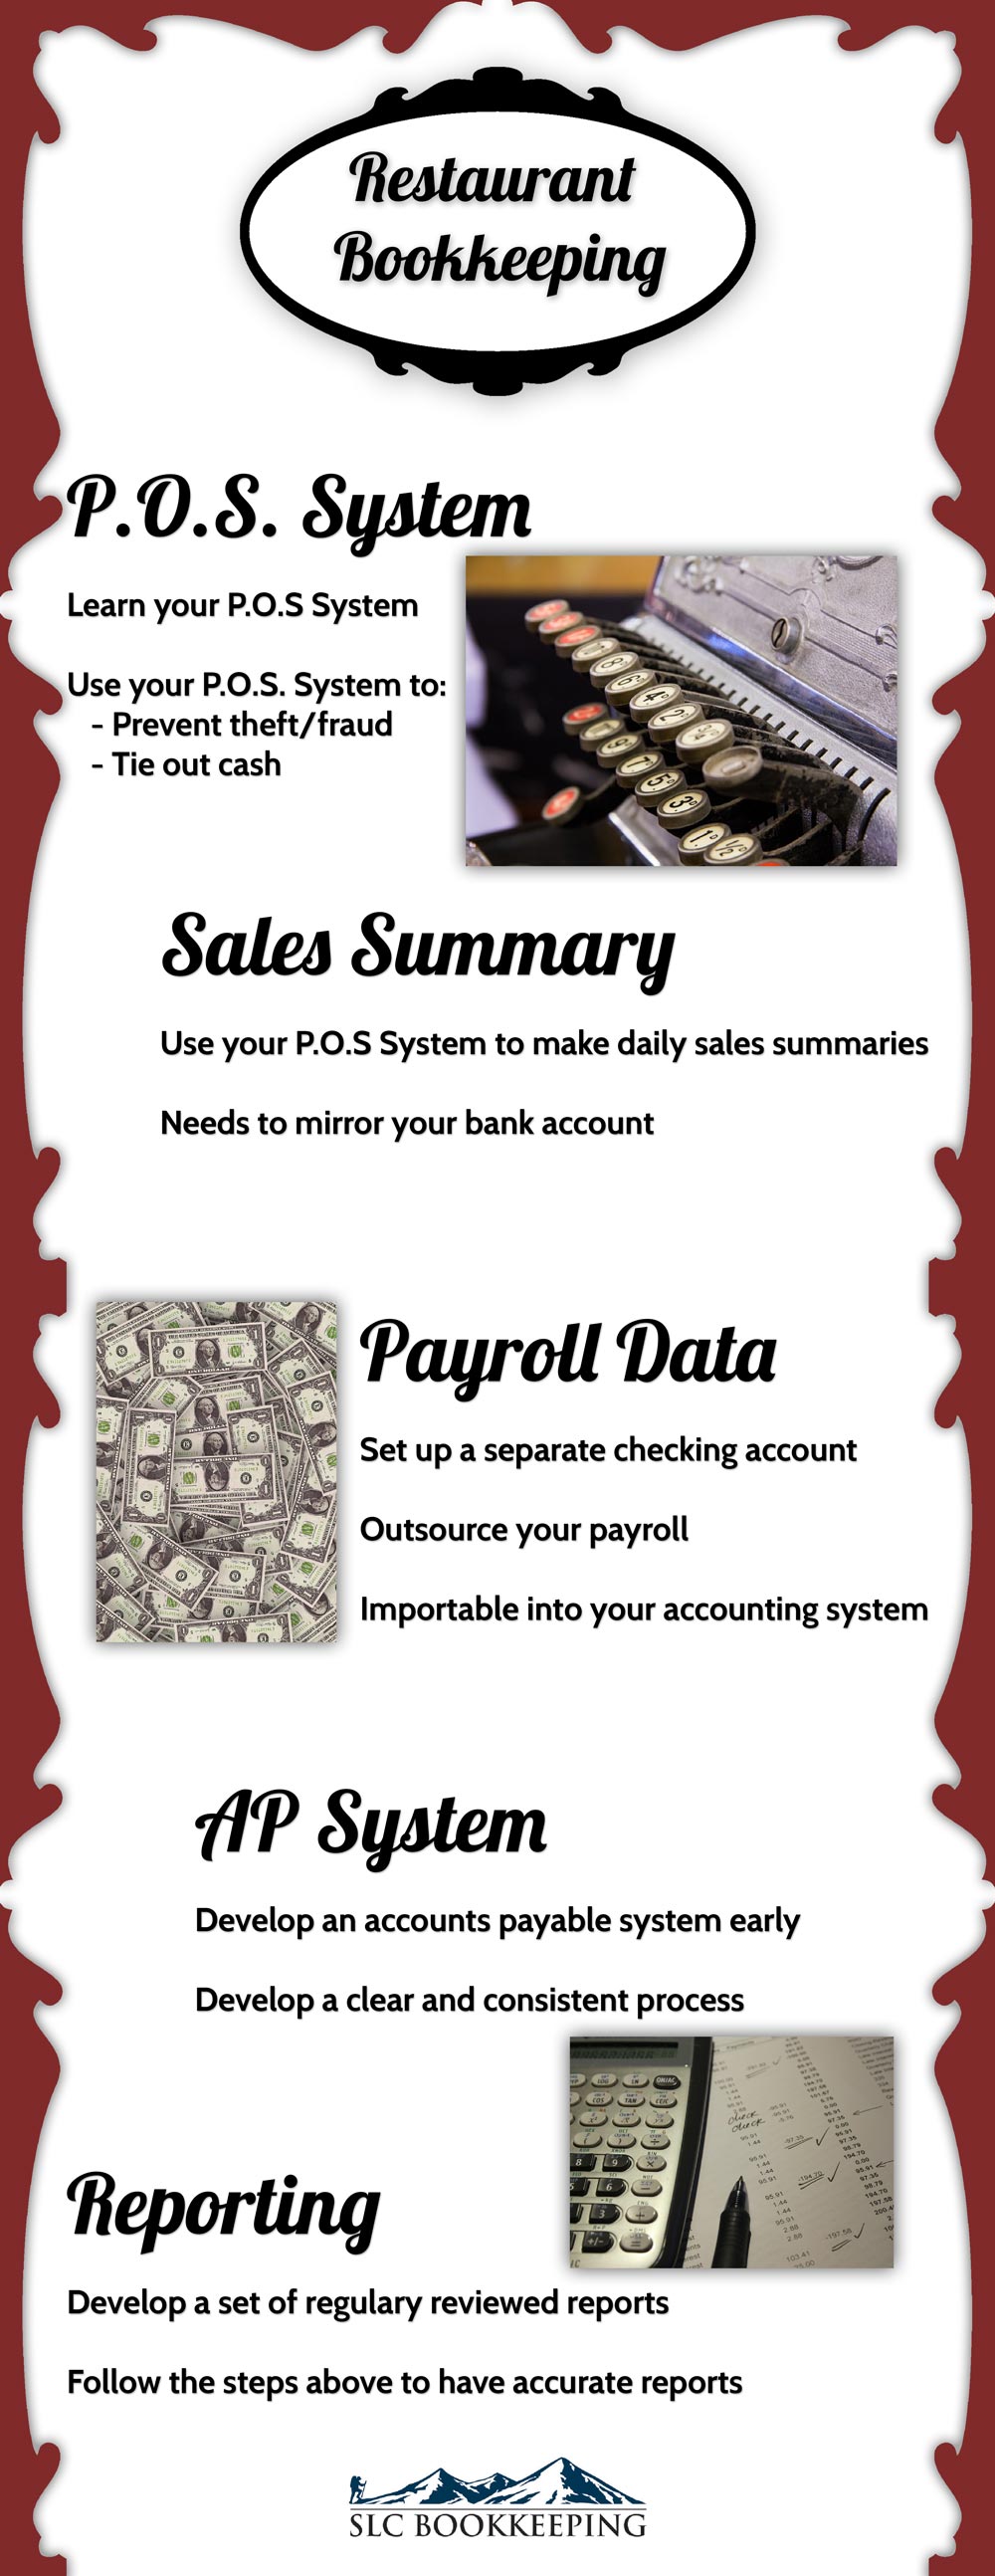 [Infographic] Develop a Dialed System for Your Restaurant Bookkeeping